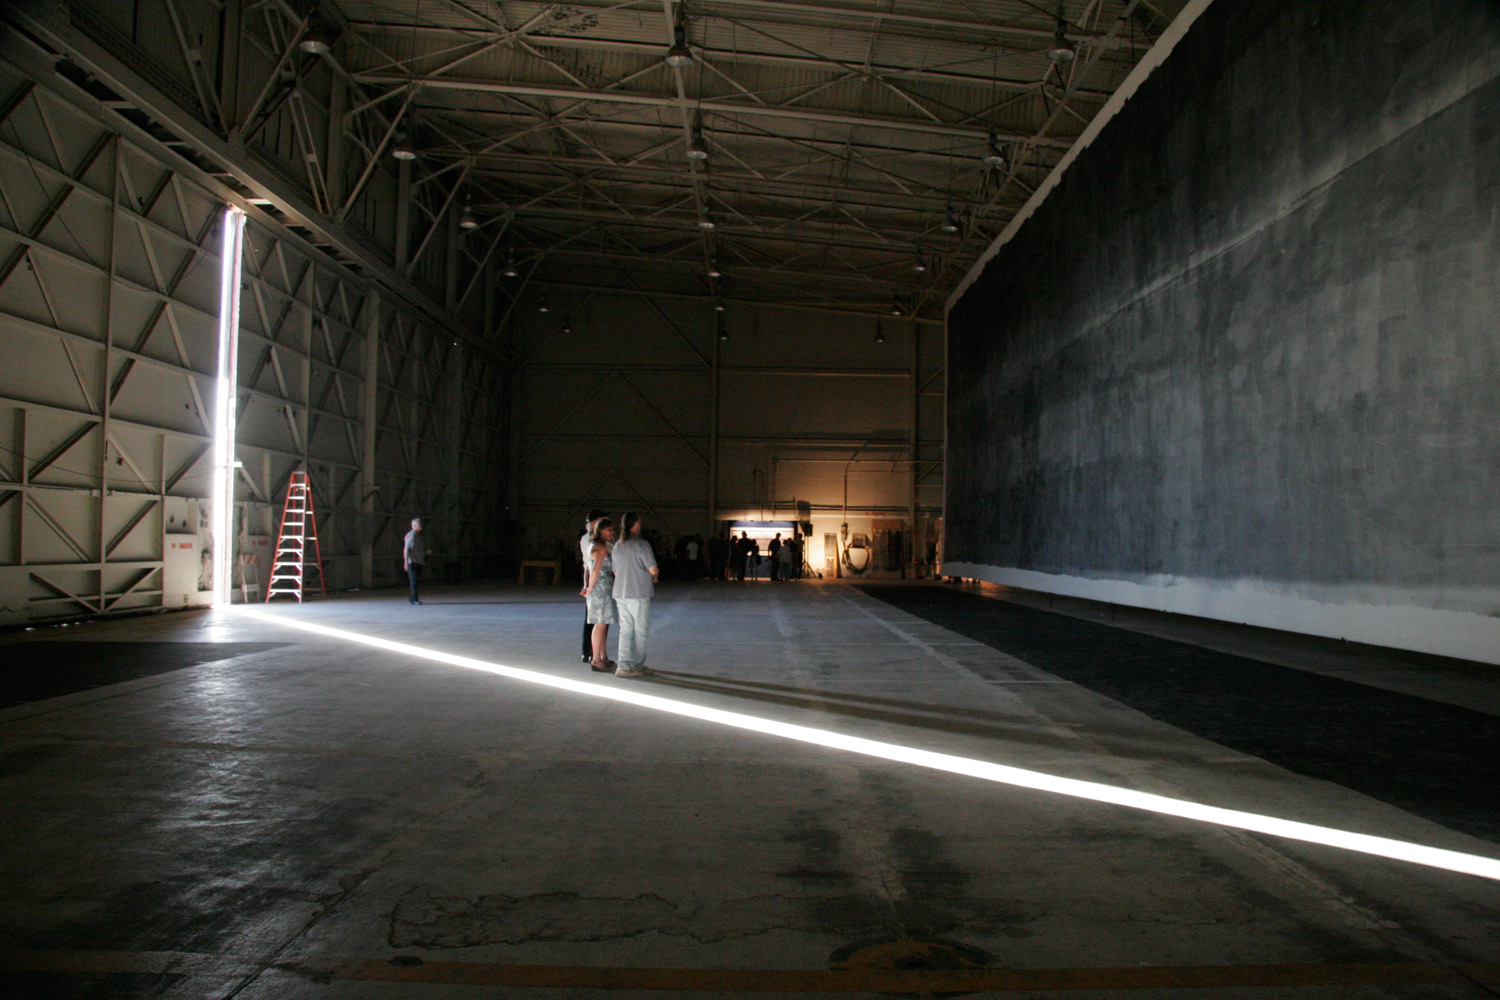 Admiring the Great Picture in the F-18 hanger with a strong beam of natural light framing the viewers.